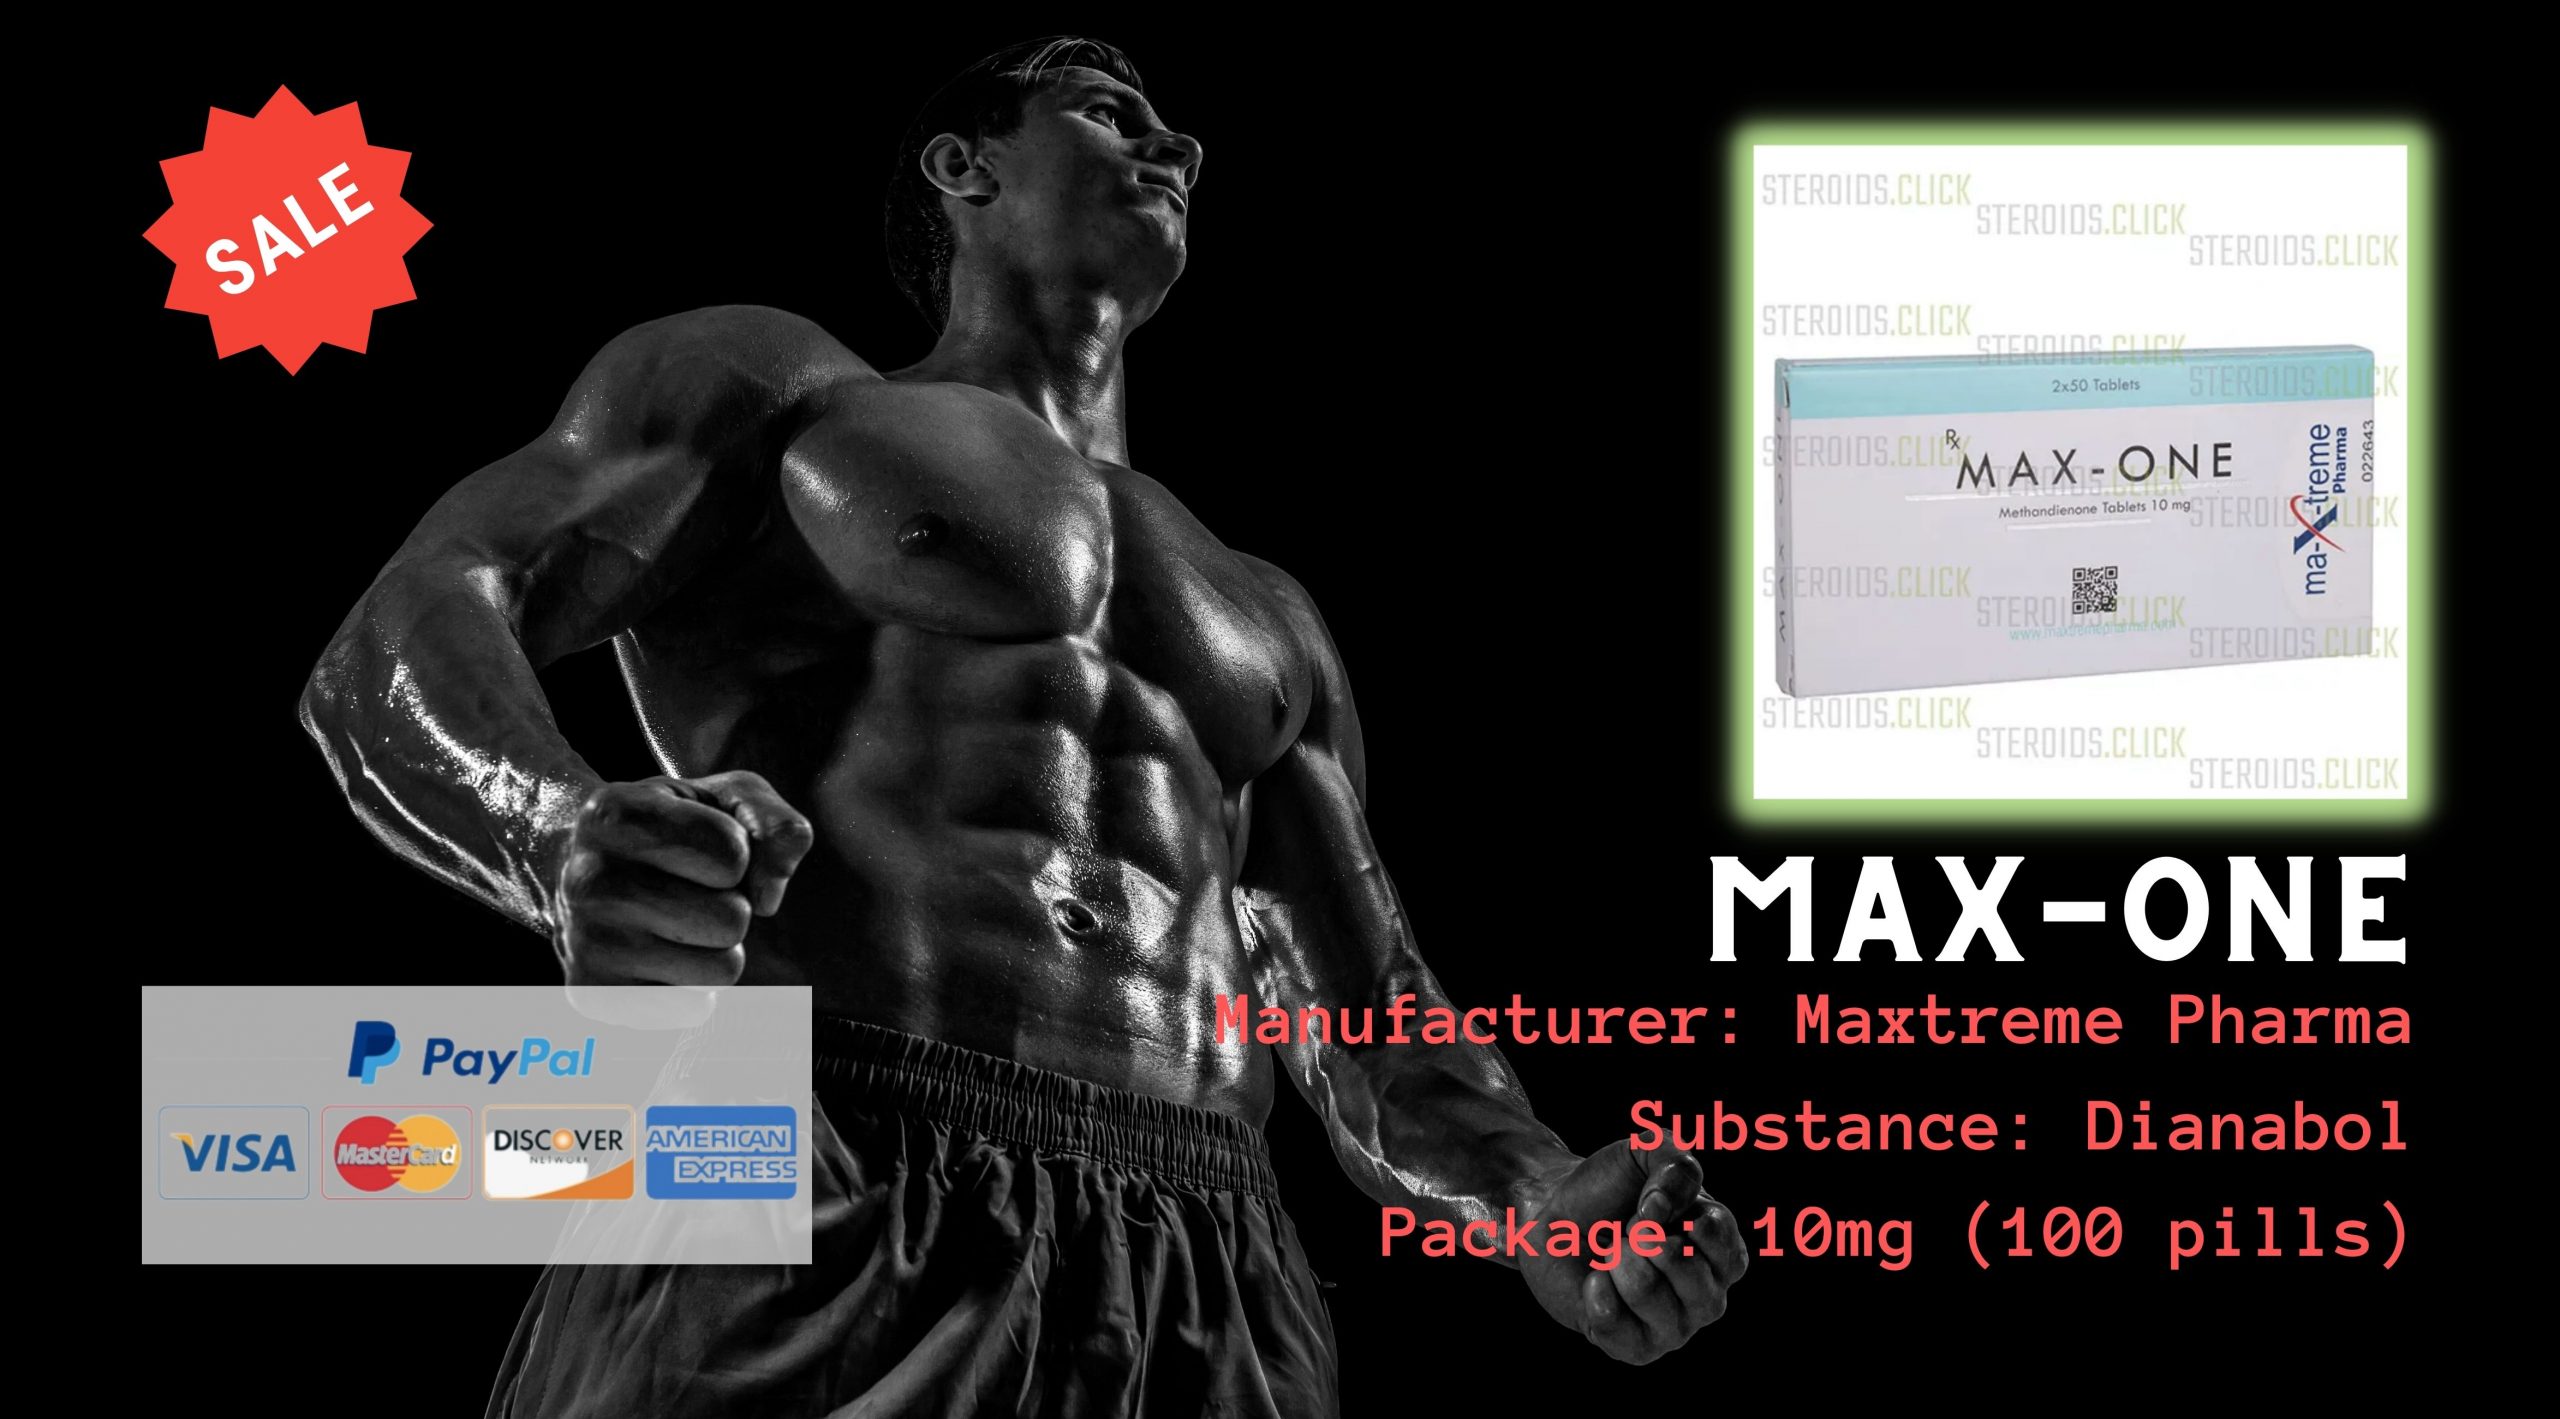 buy Max-One at steroids.click